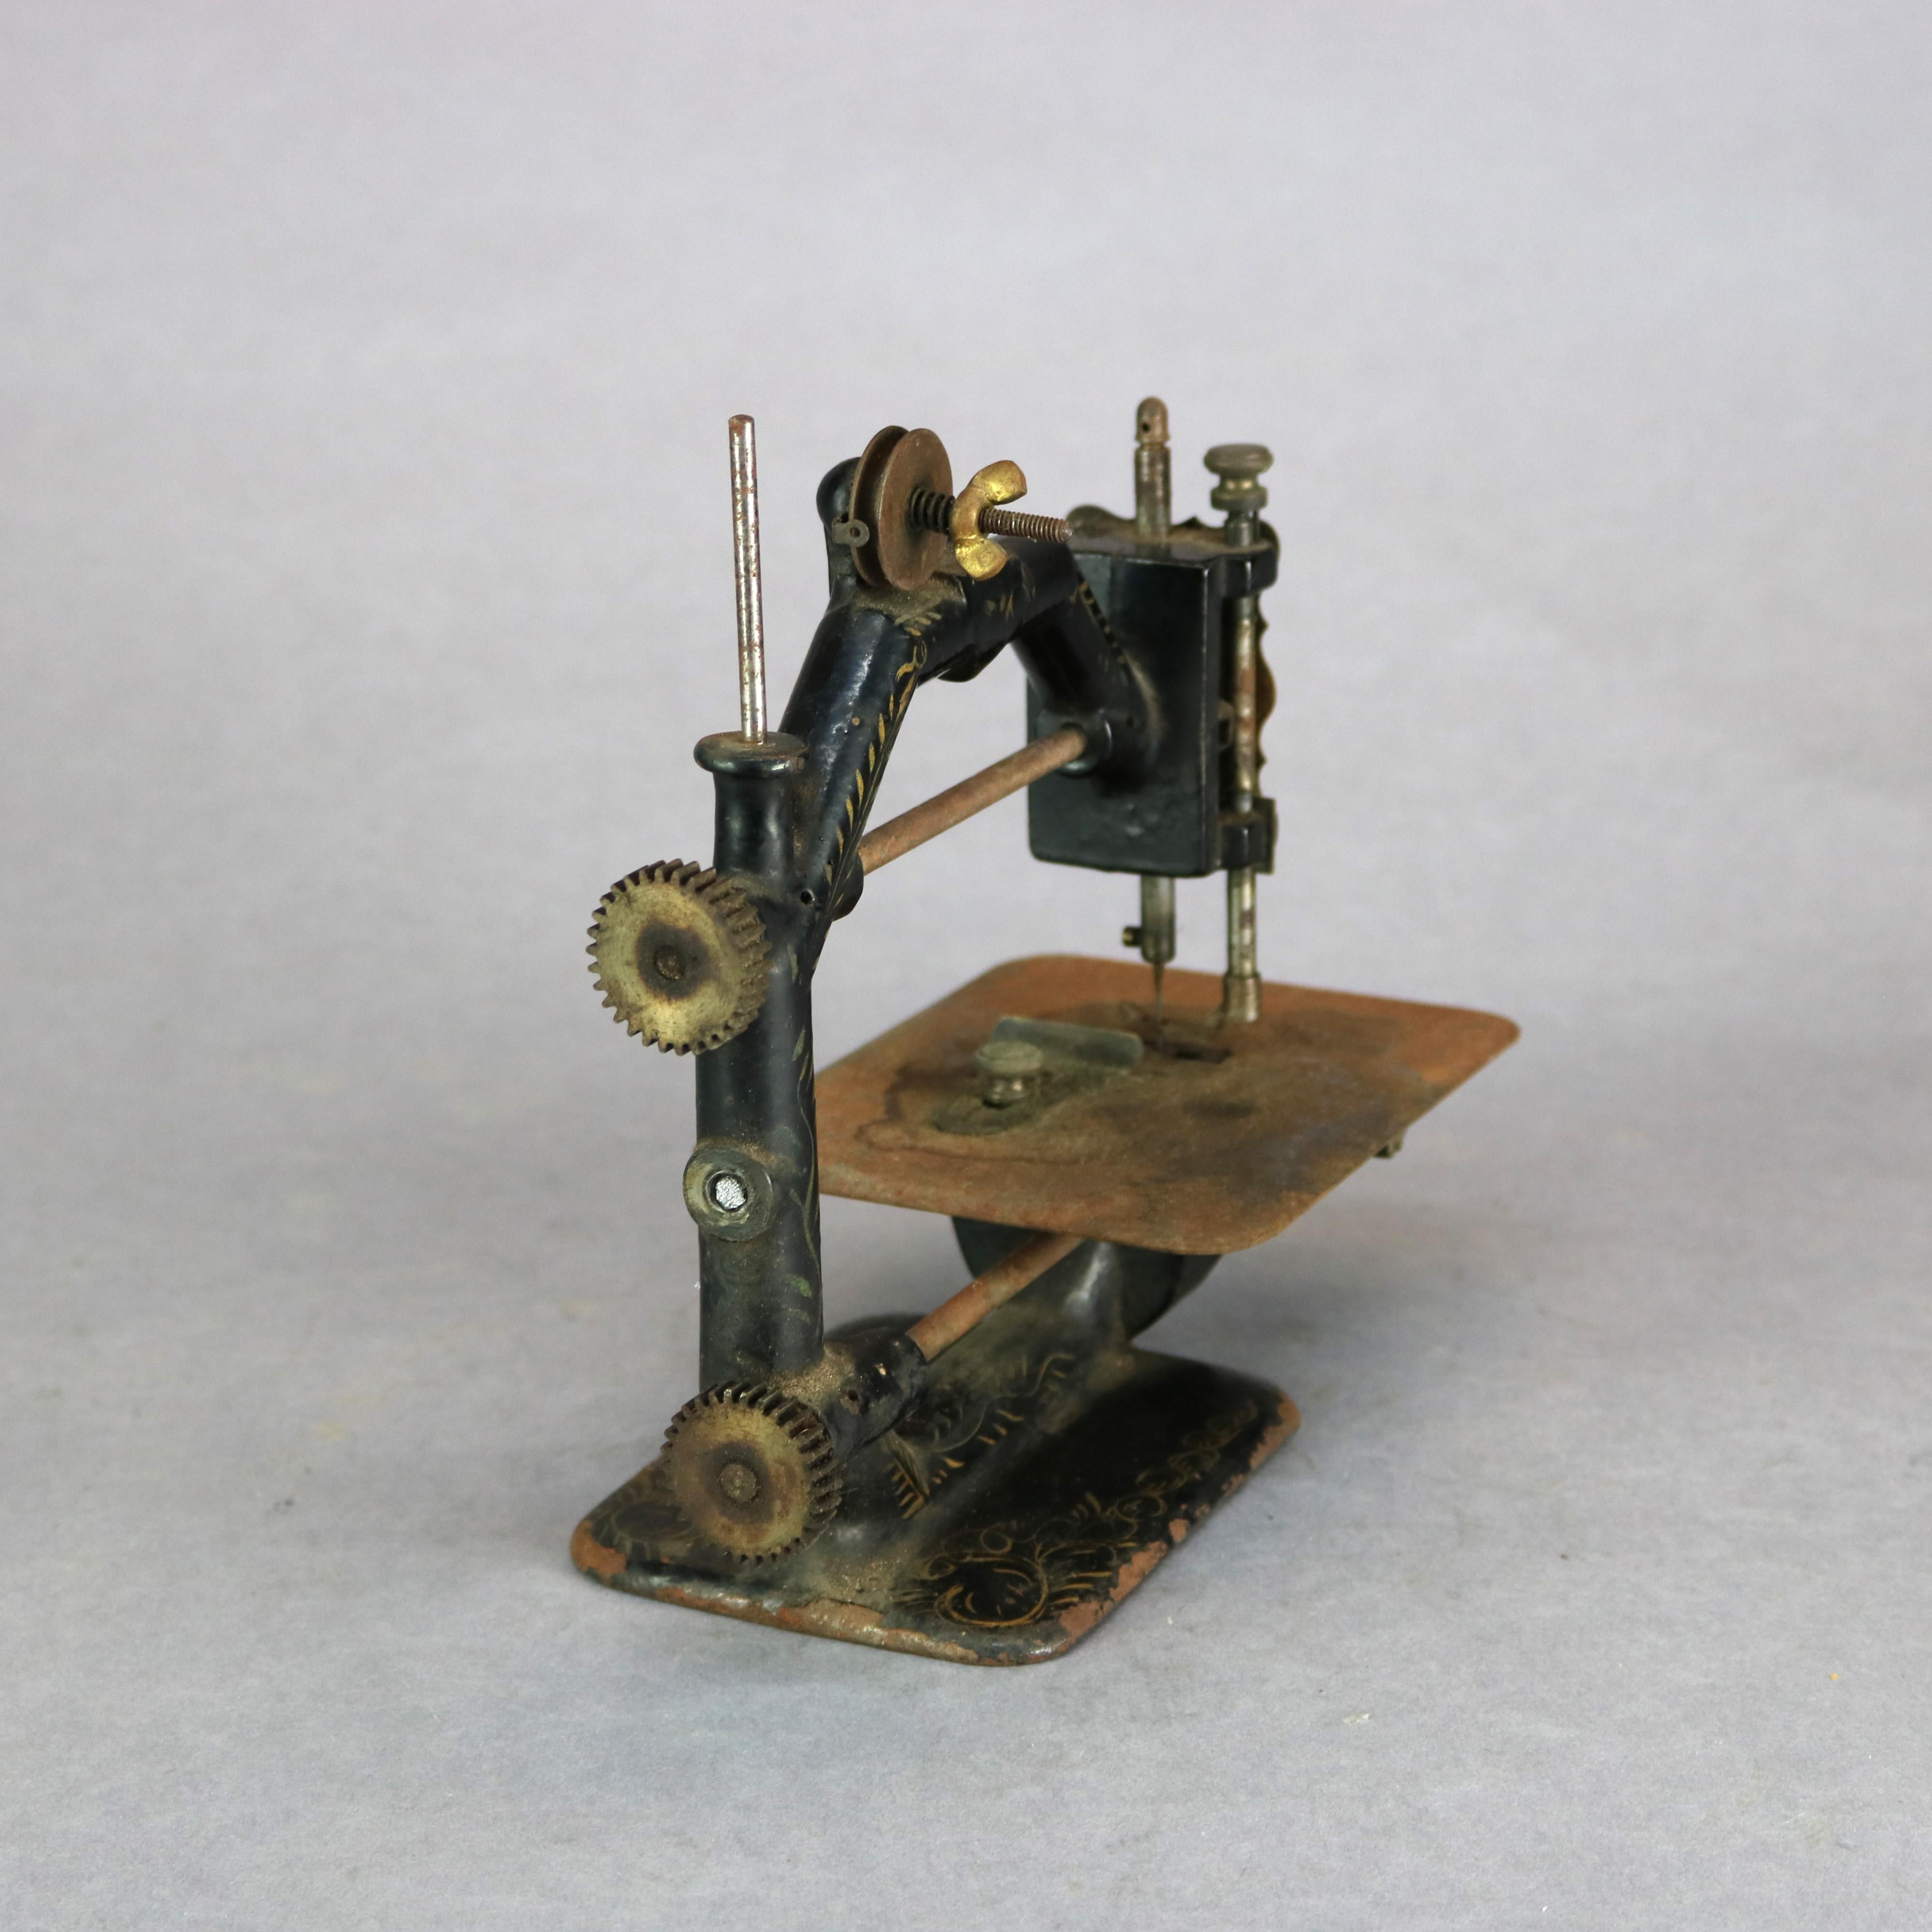 An antique early table top sewing machine offers rare form in cast construction with ebonized finish having gilt foliate decoration, c1850

Measures: 8.25